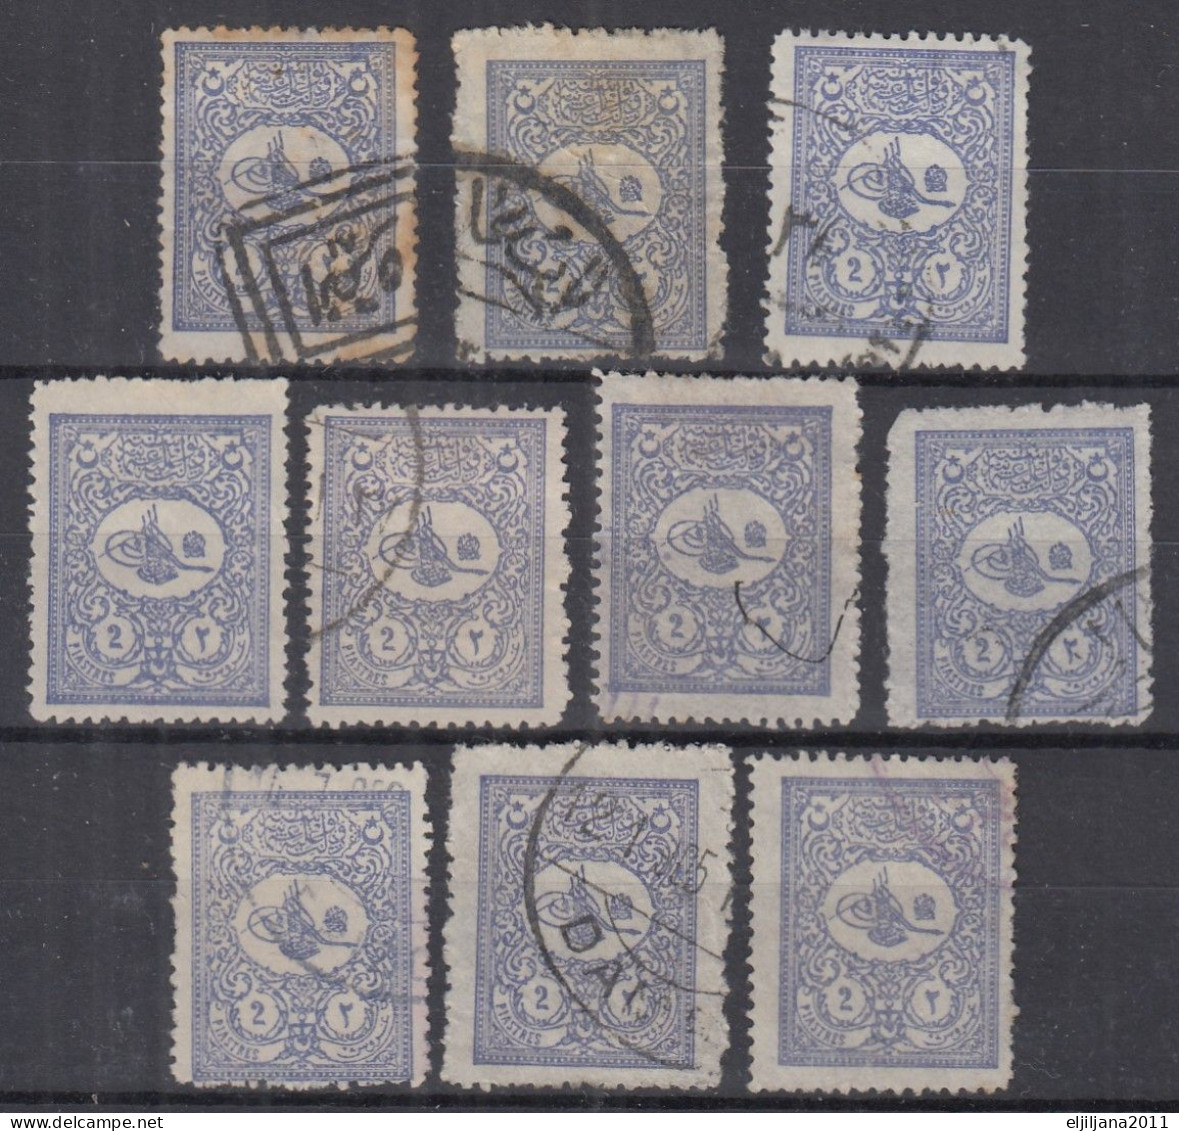 ⁕ Turkey 1901 - 1905 ⁕ Tughra Of Abdul Hamid II. / Coat Of Arms / Foreign Post, 2 Pia. Mi.104 ⁕ 10v Used - Used Stamps